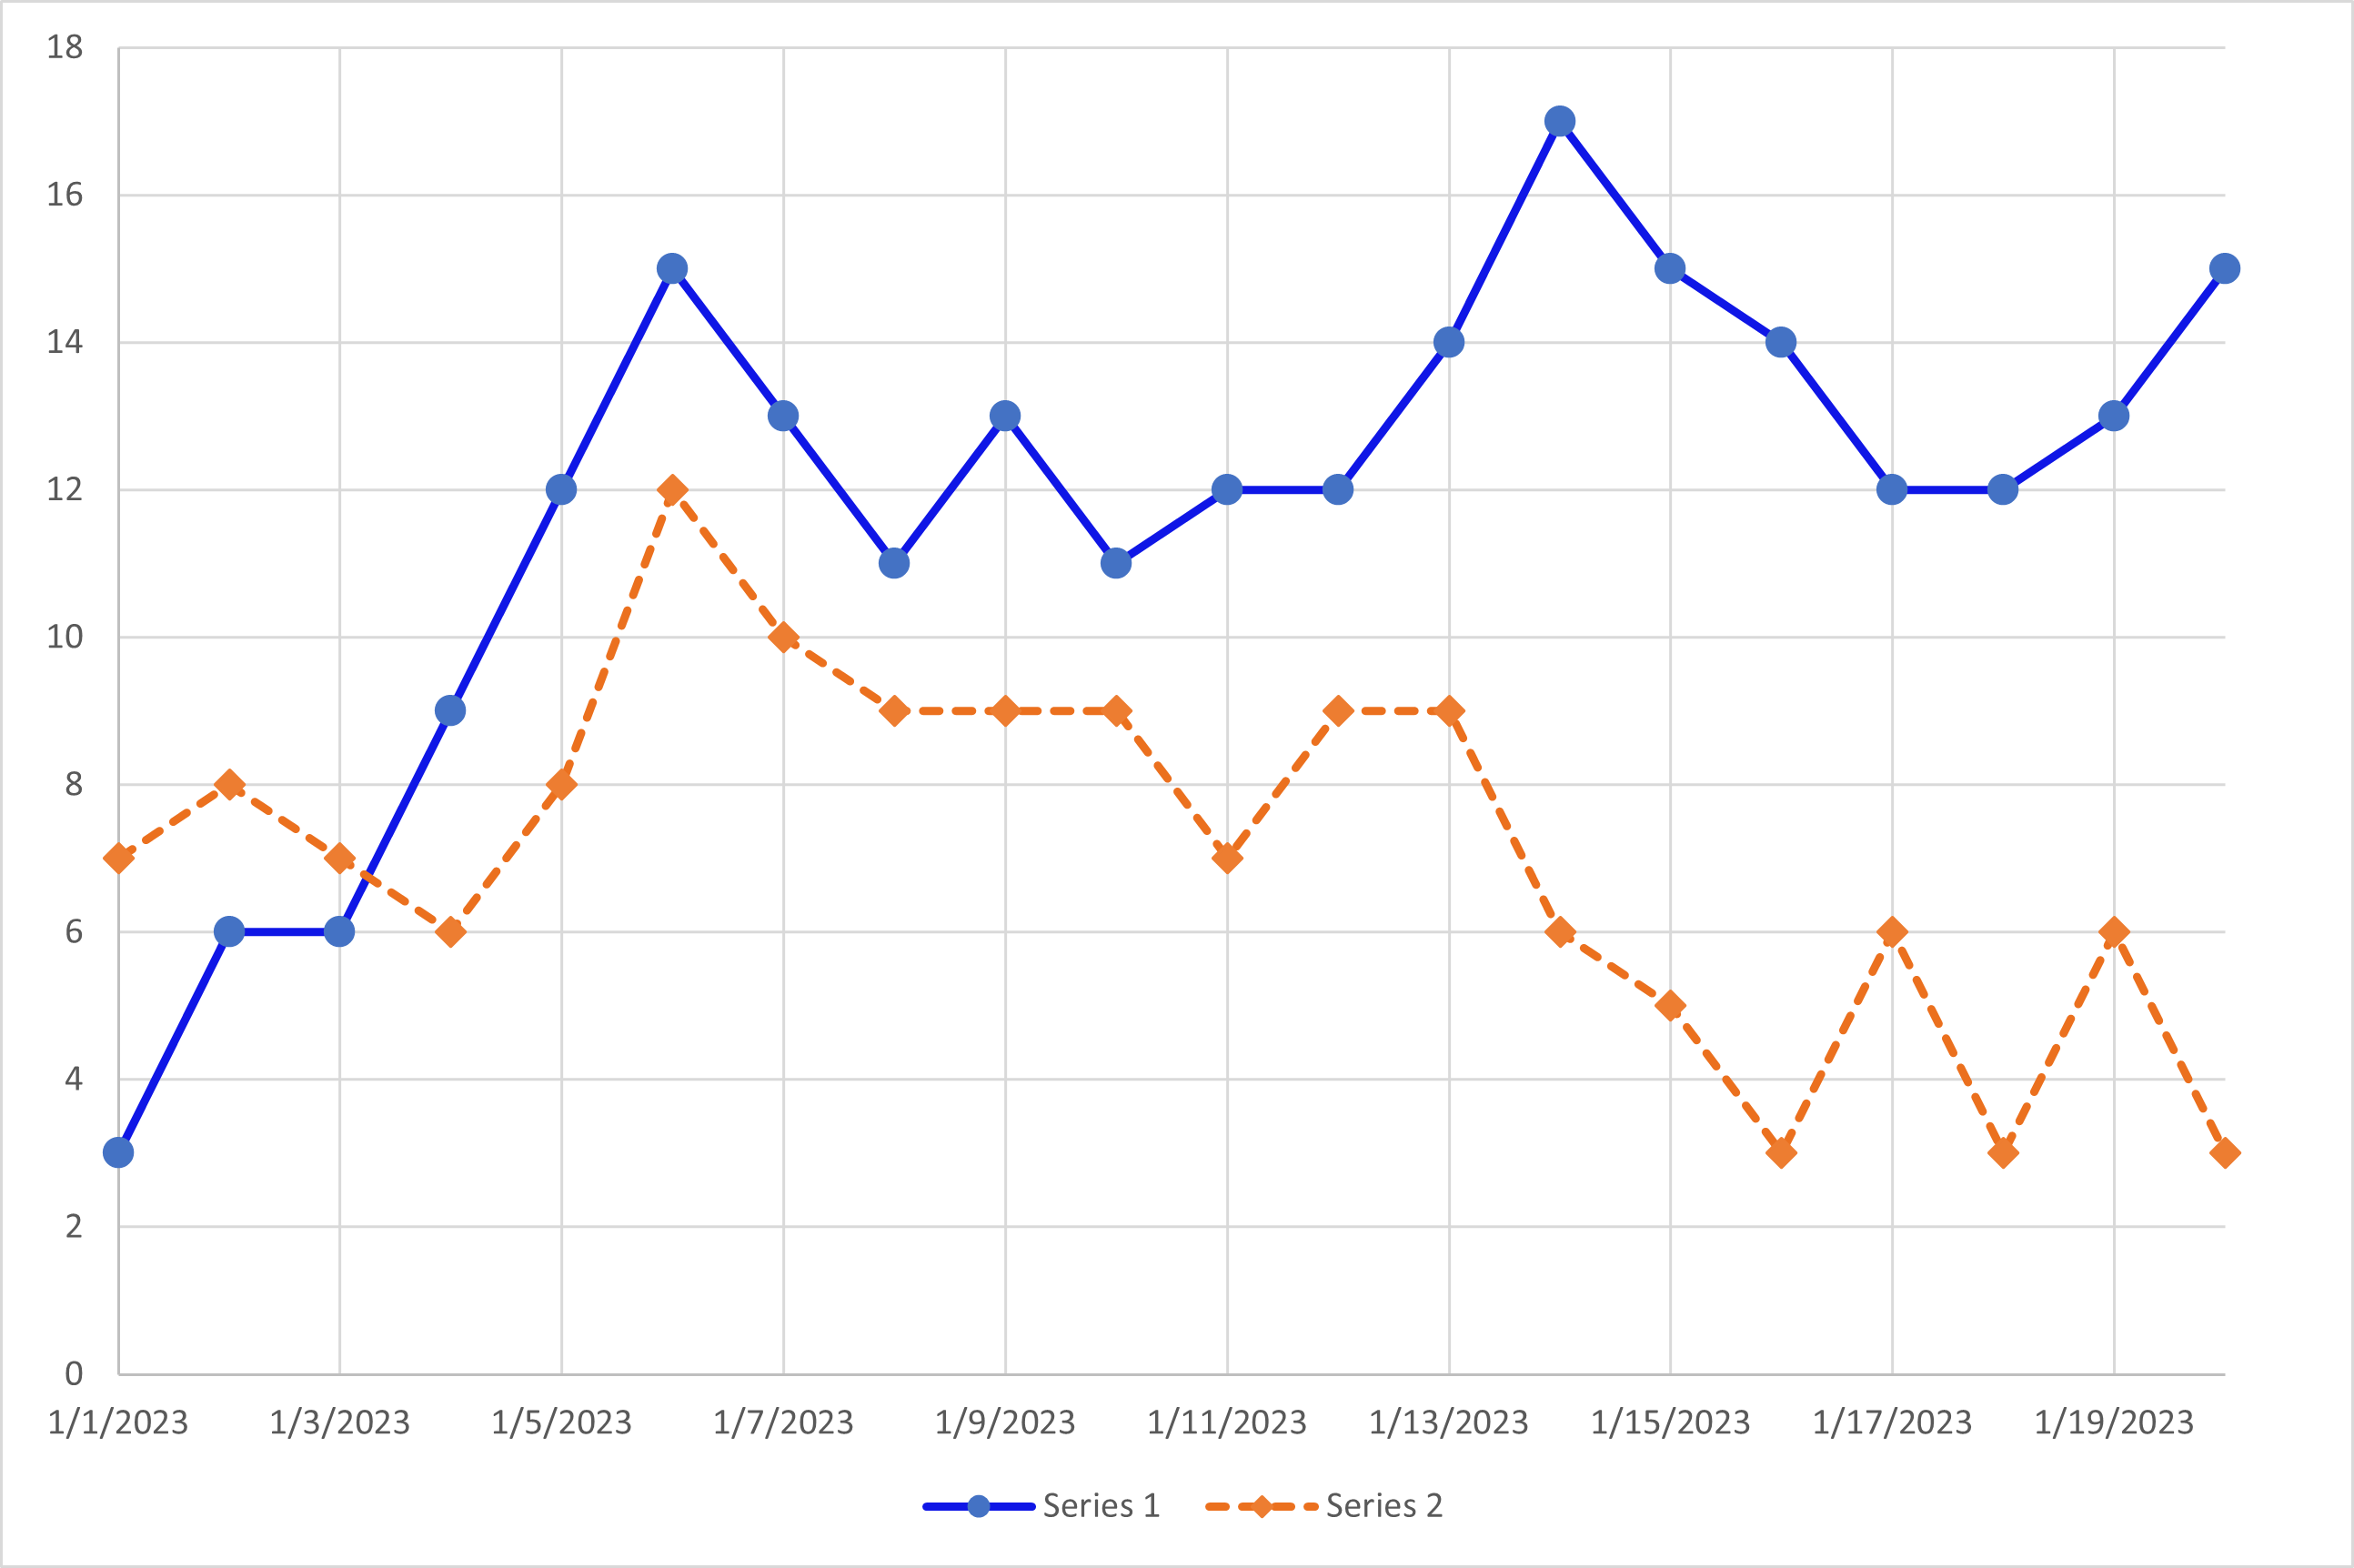 Sample image of a line graph with made up data. One series of data is represented with a solid blue line and circles denoting distinct data points. The other series of data is denoted by a dashed orange line with diamonds at the distinct data points.